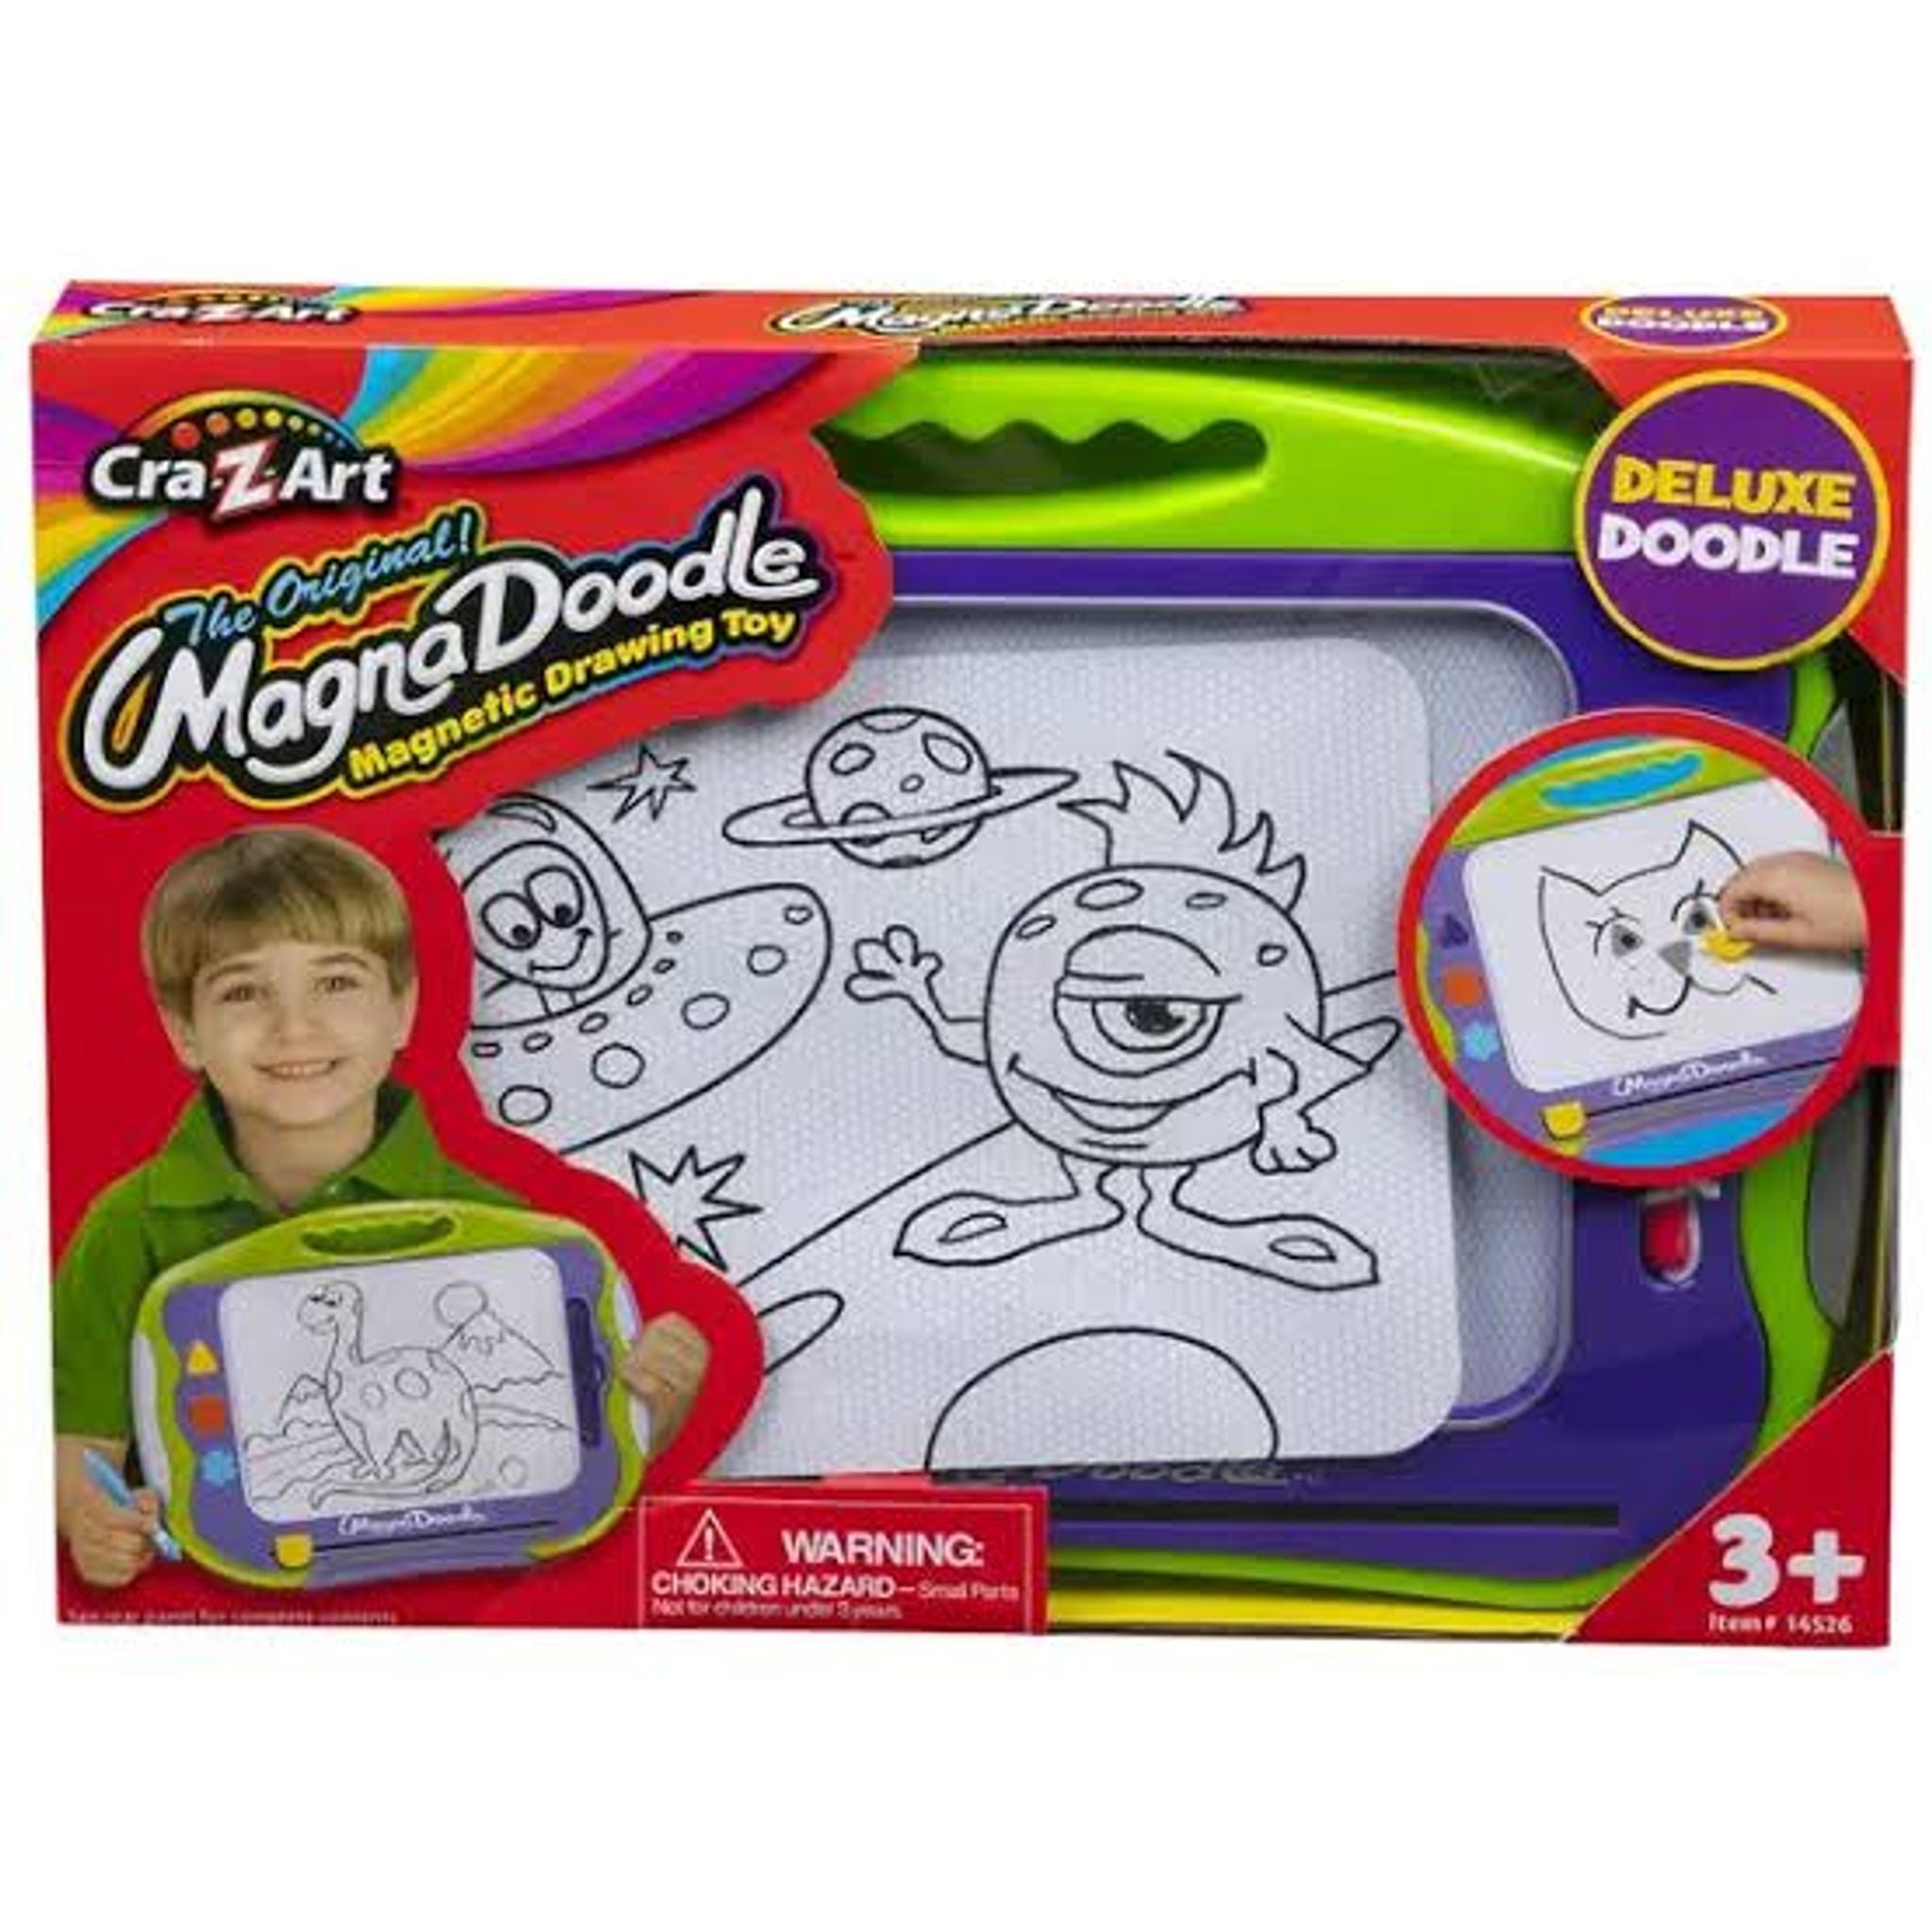 The Original Magna Doodle Deluxe - Toybox Tales